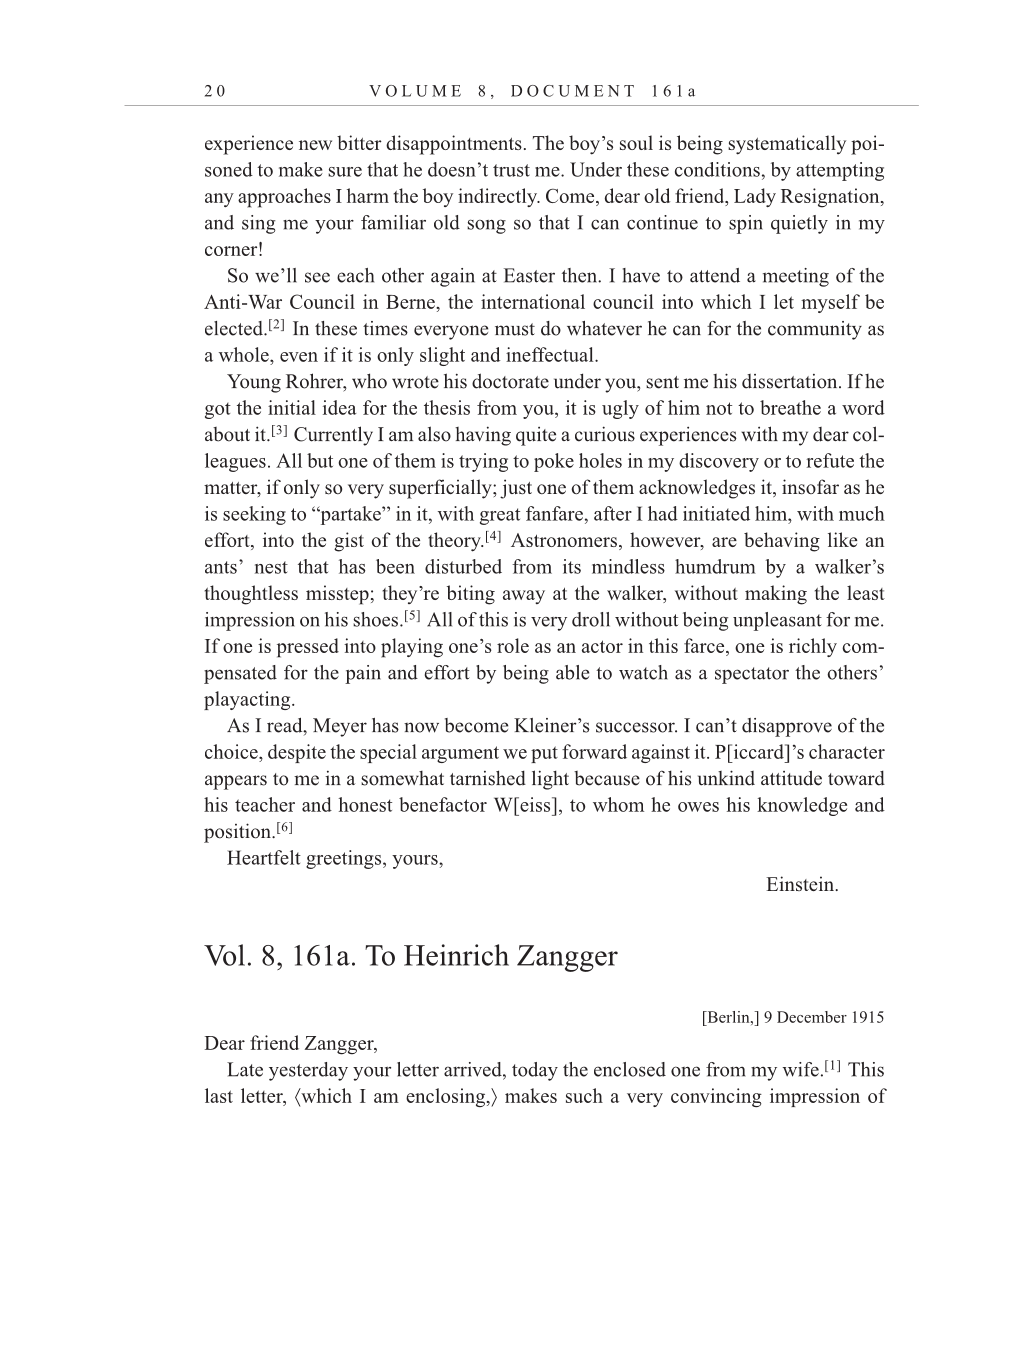 Volume 10: The Berlin Years: Correspondence, May-December 1920, and Supplementary Correspondence, 1909-1920 (English translation supplement) page 20